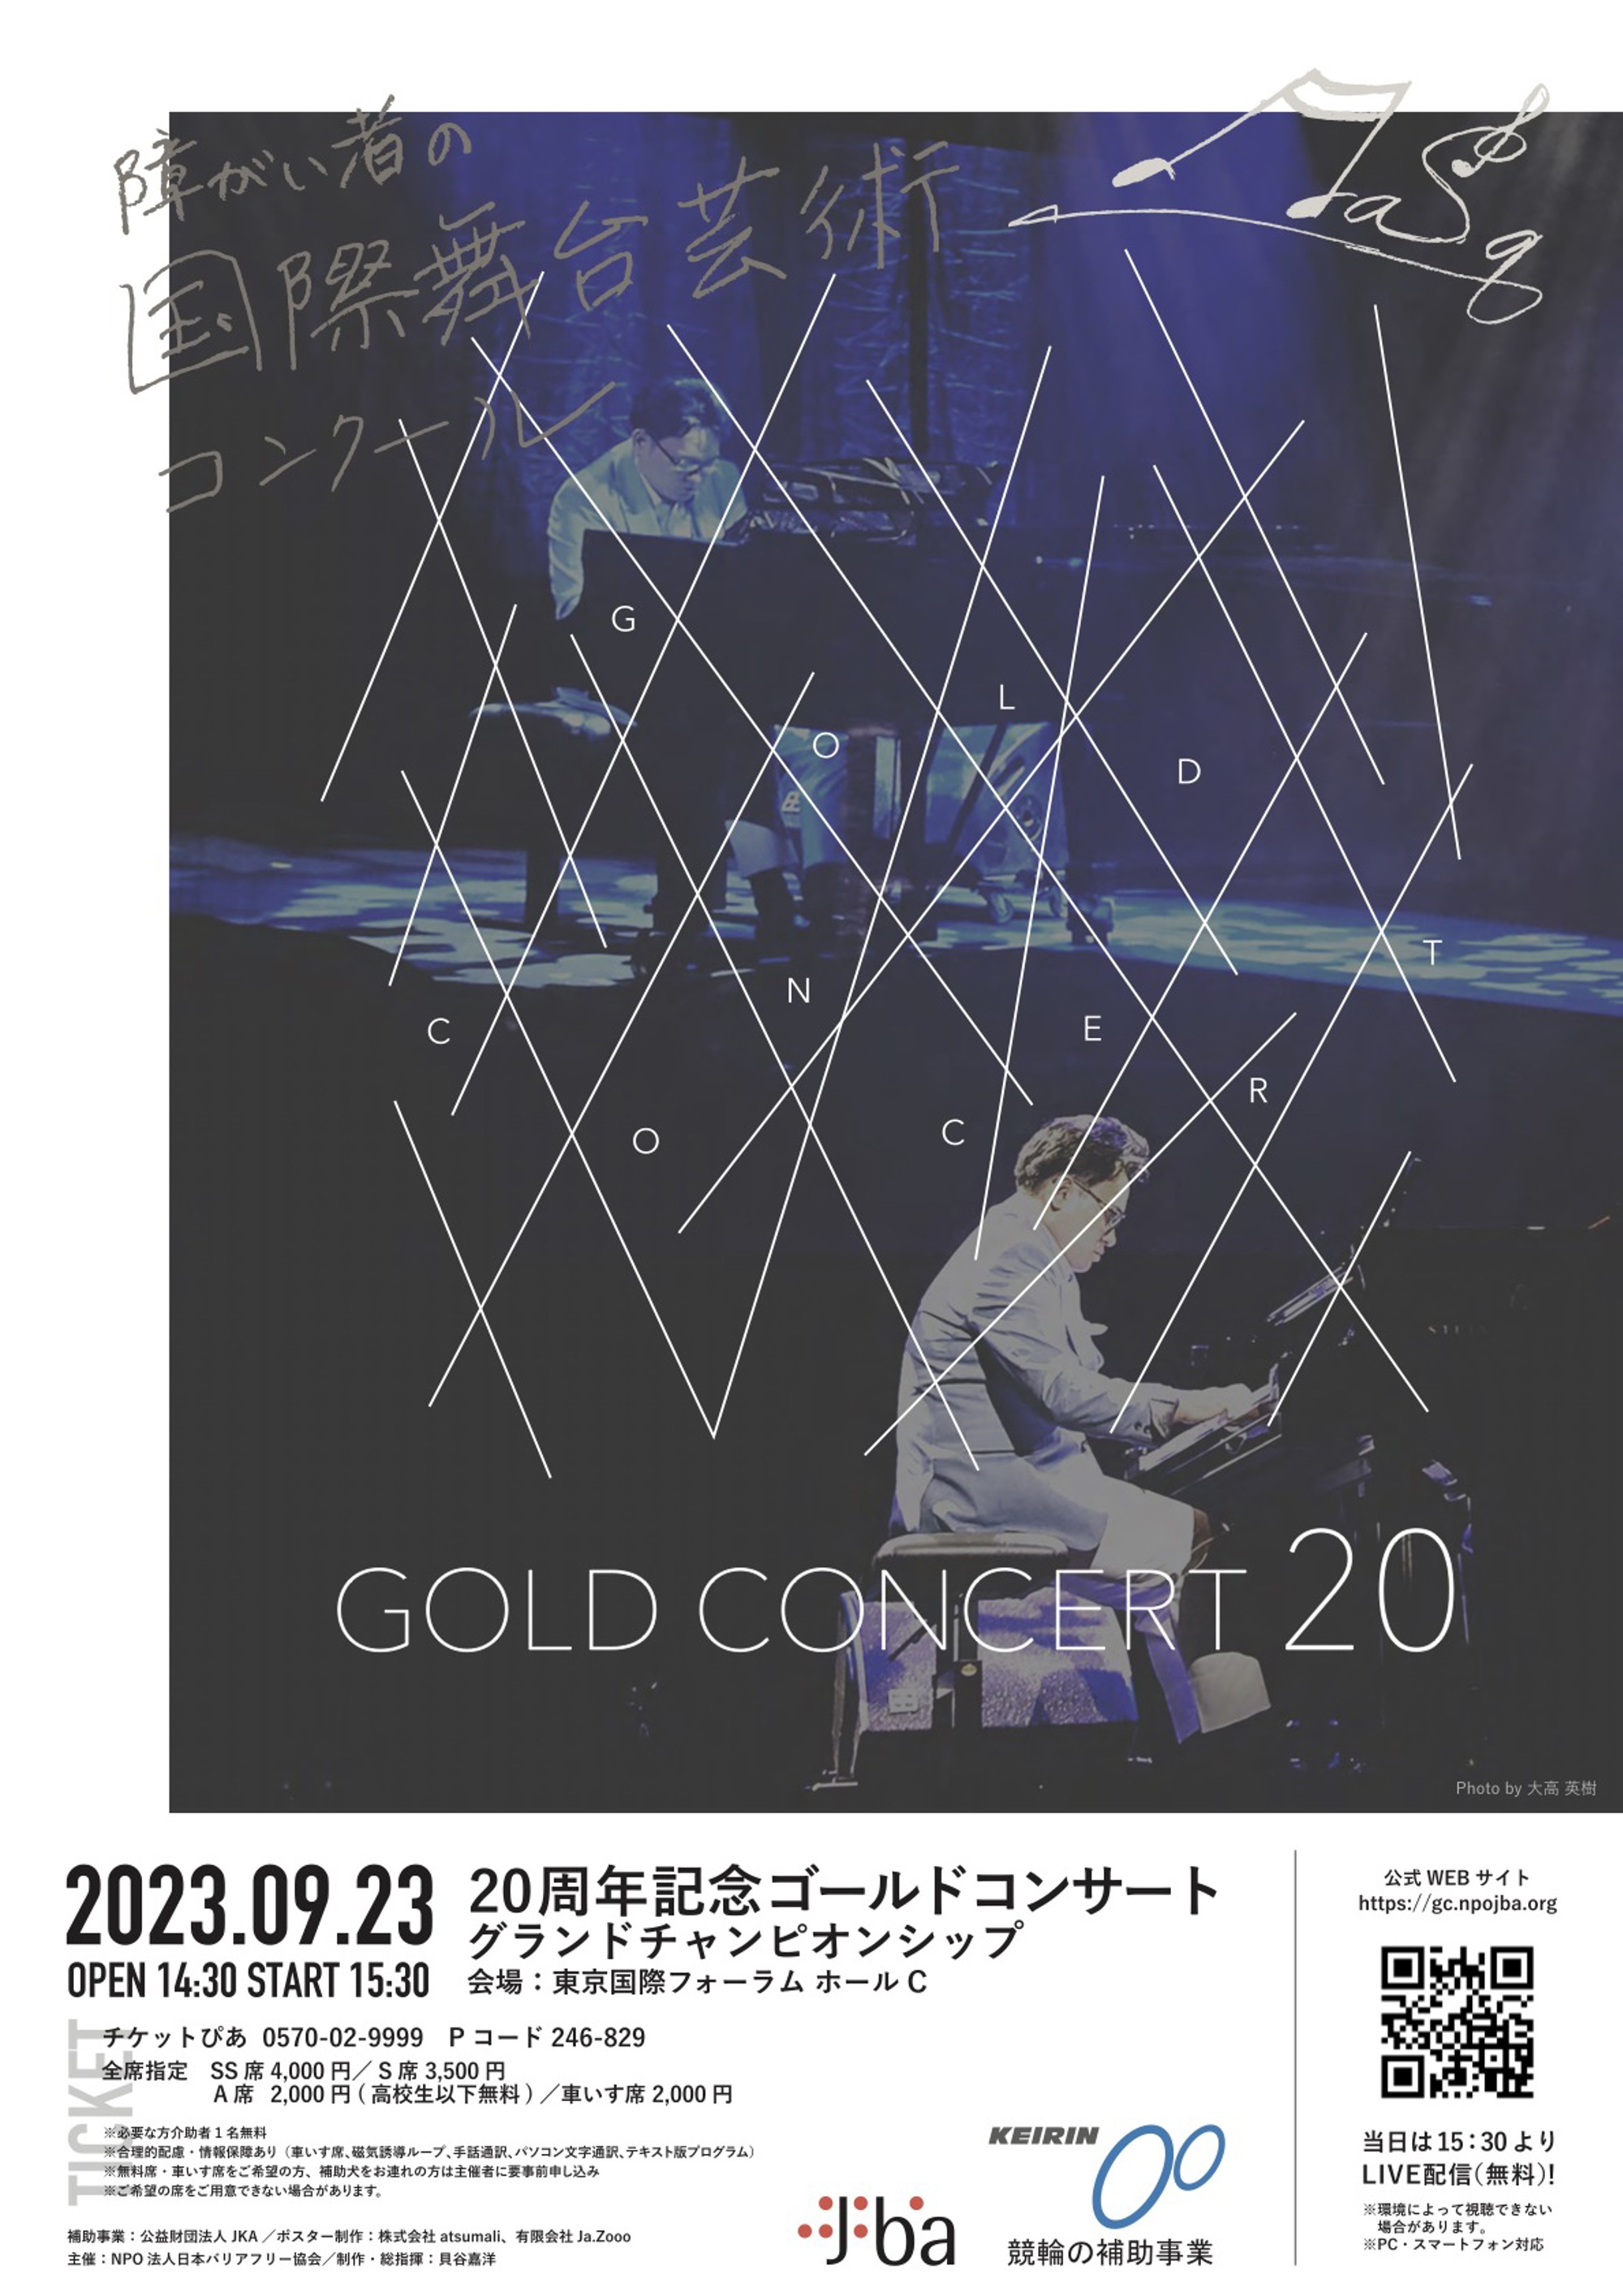 The 20th Anniversary of Gold Concert Grand Championship